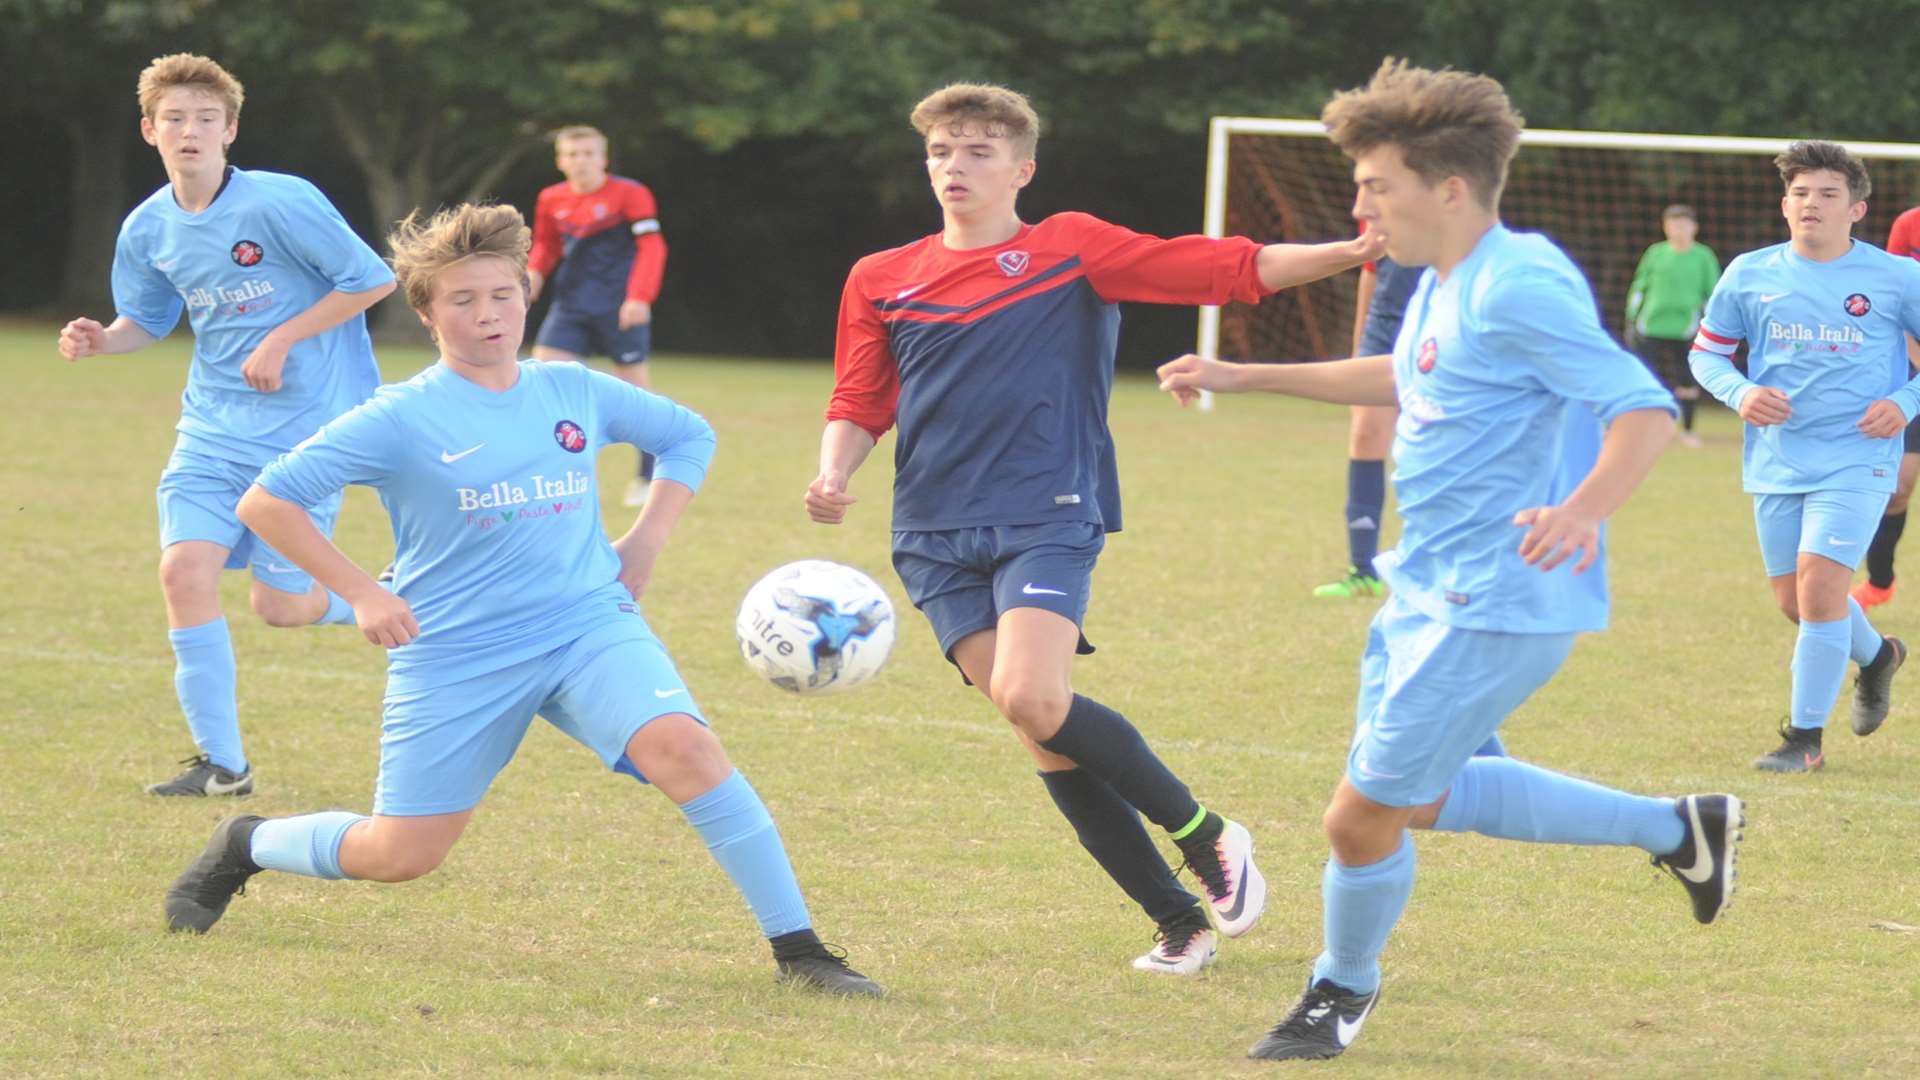 Rainham Kenilworth and Hempstead Valley under-16s battle for the points in Division 1 Picture: Steve Crispe